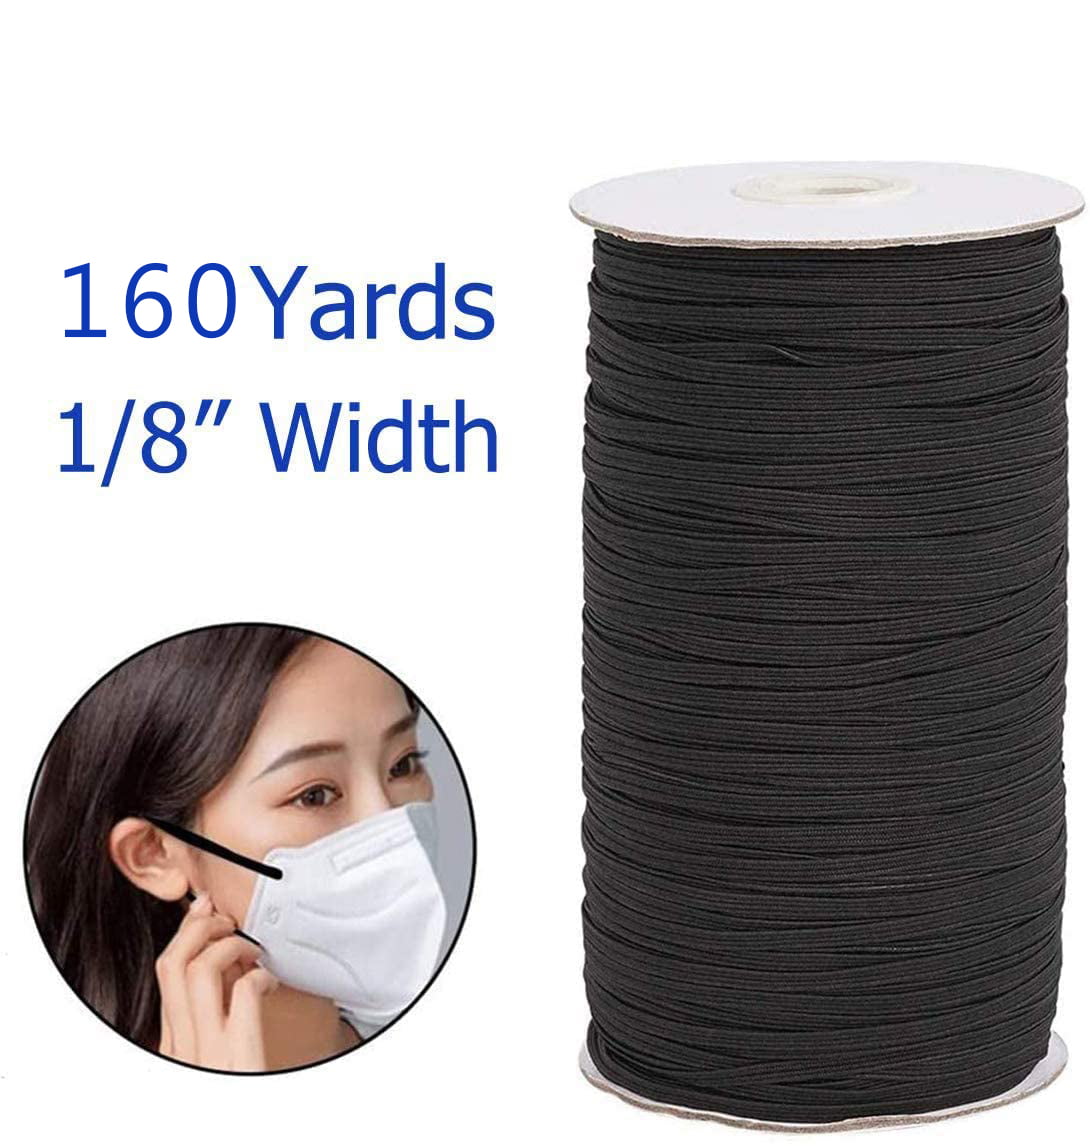 Widen Thicken Elastic Band Sewing Stretch Flat Cord Rubber Bands Black White 